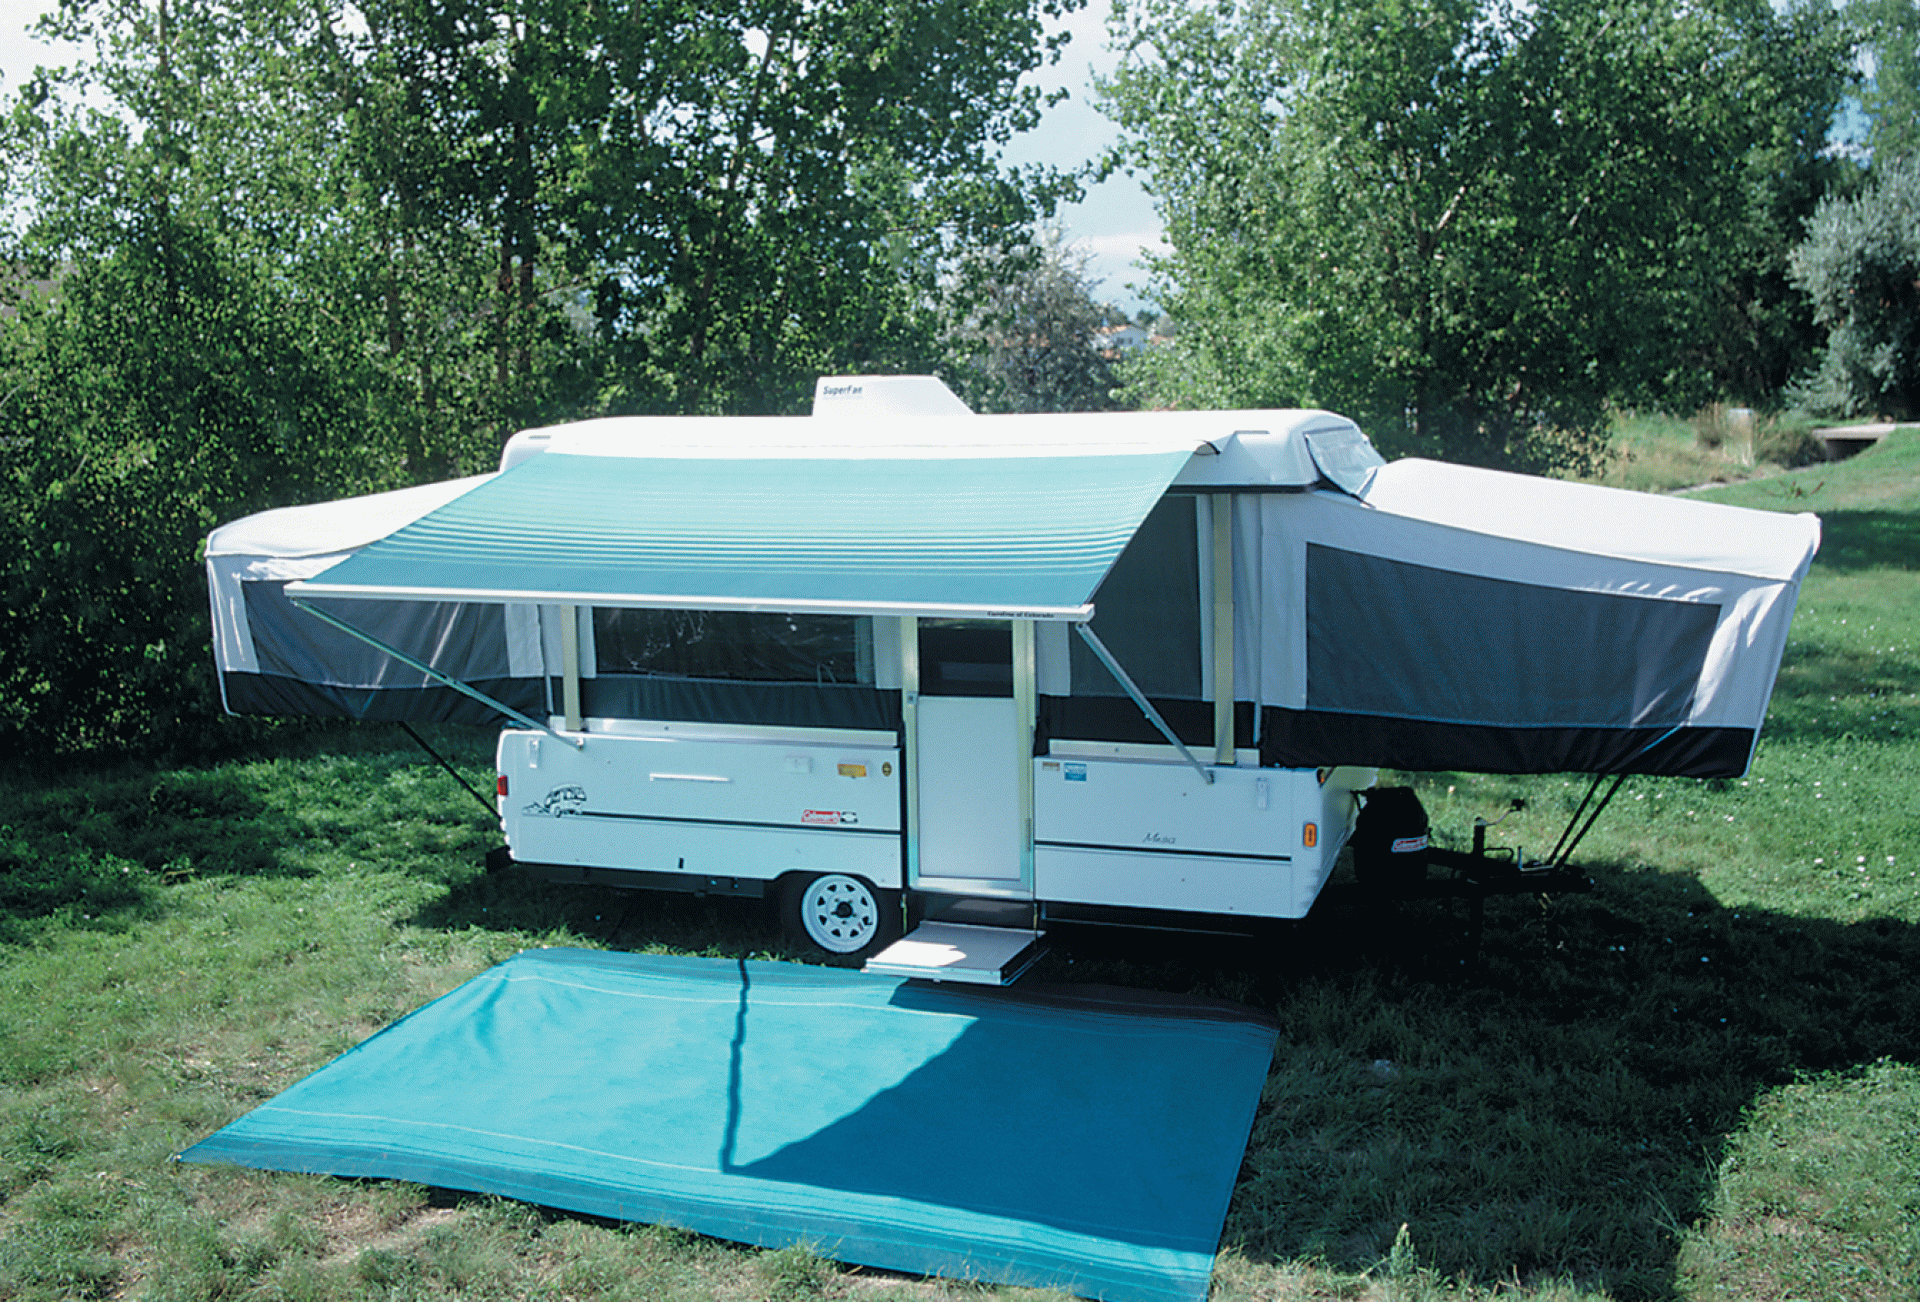 CAREFREE OF COLORADO | 981387900 | Campout Awning 3.5 Metric 11' 6" Ocean Blue with White Bag